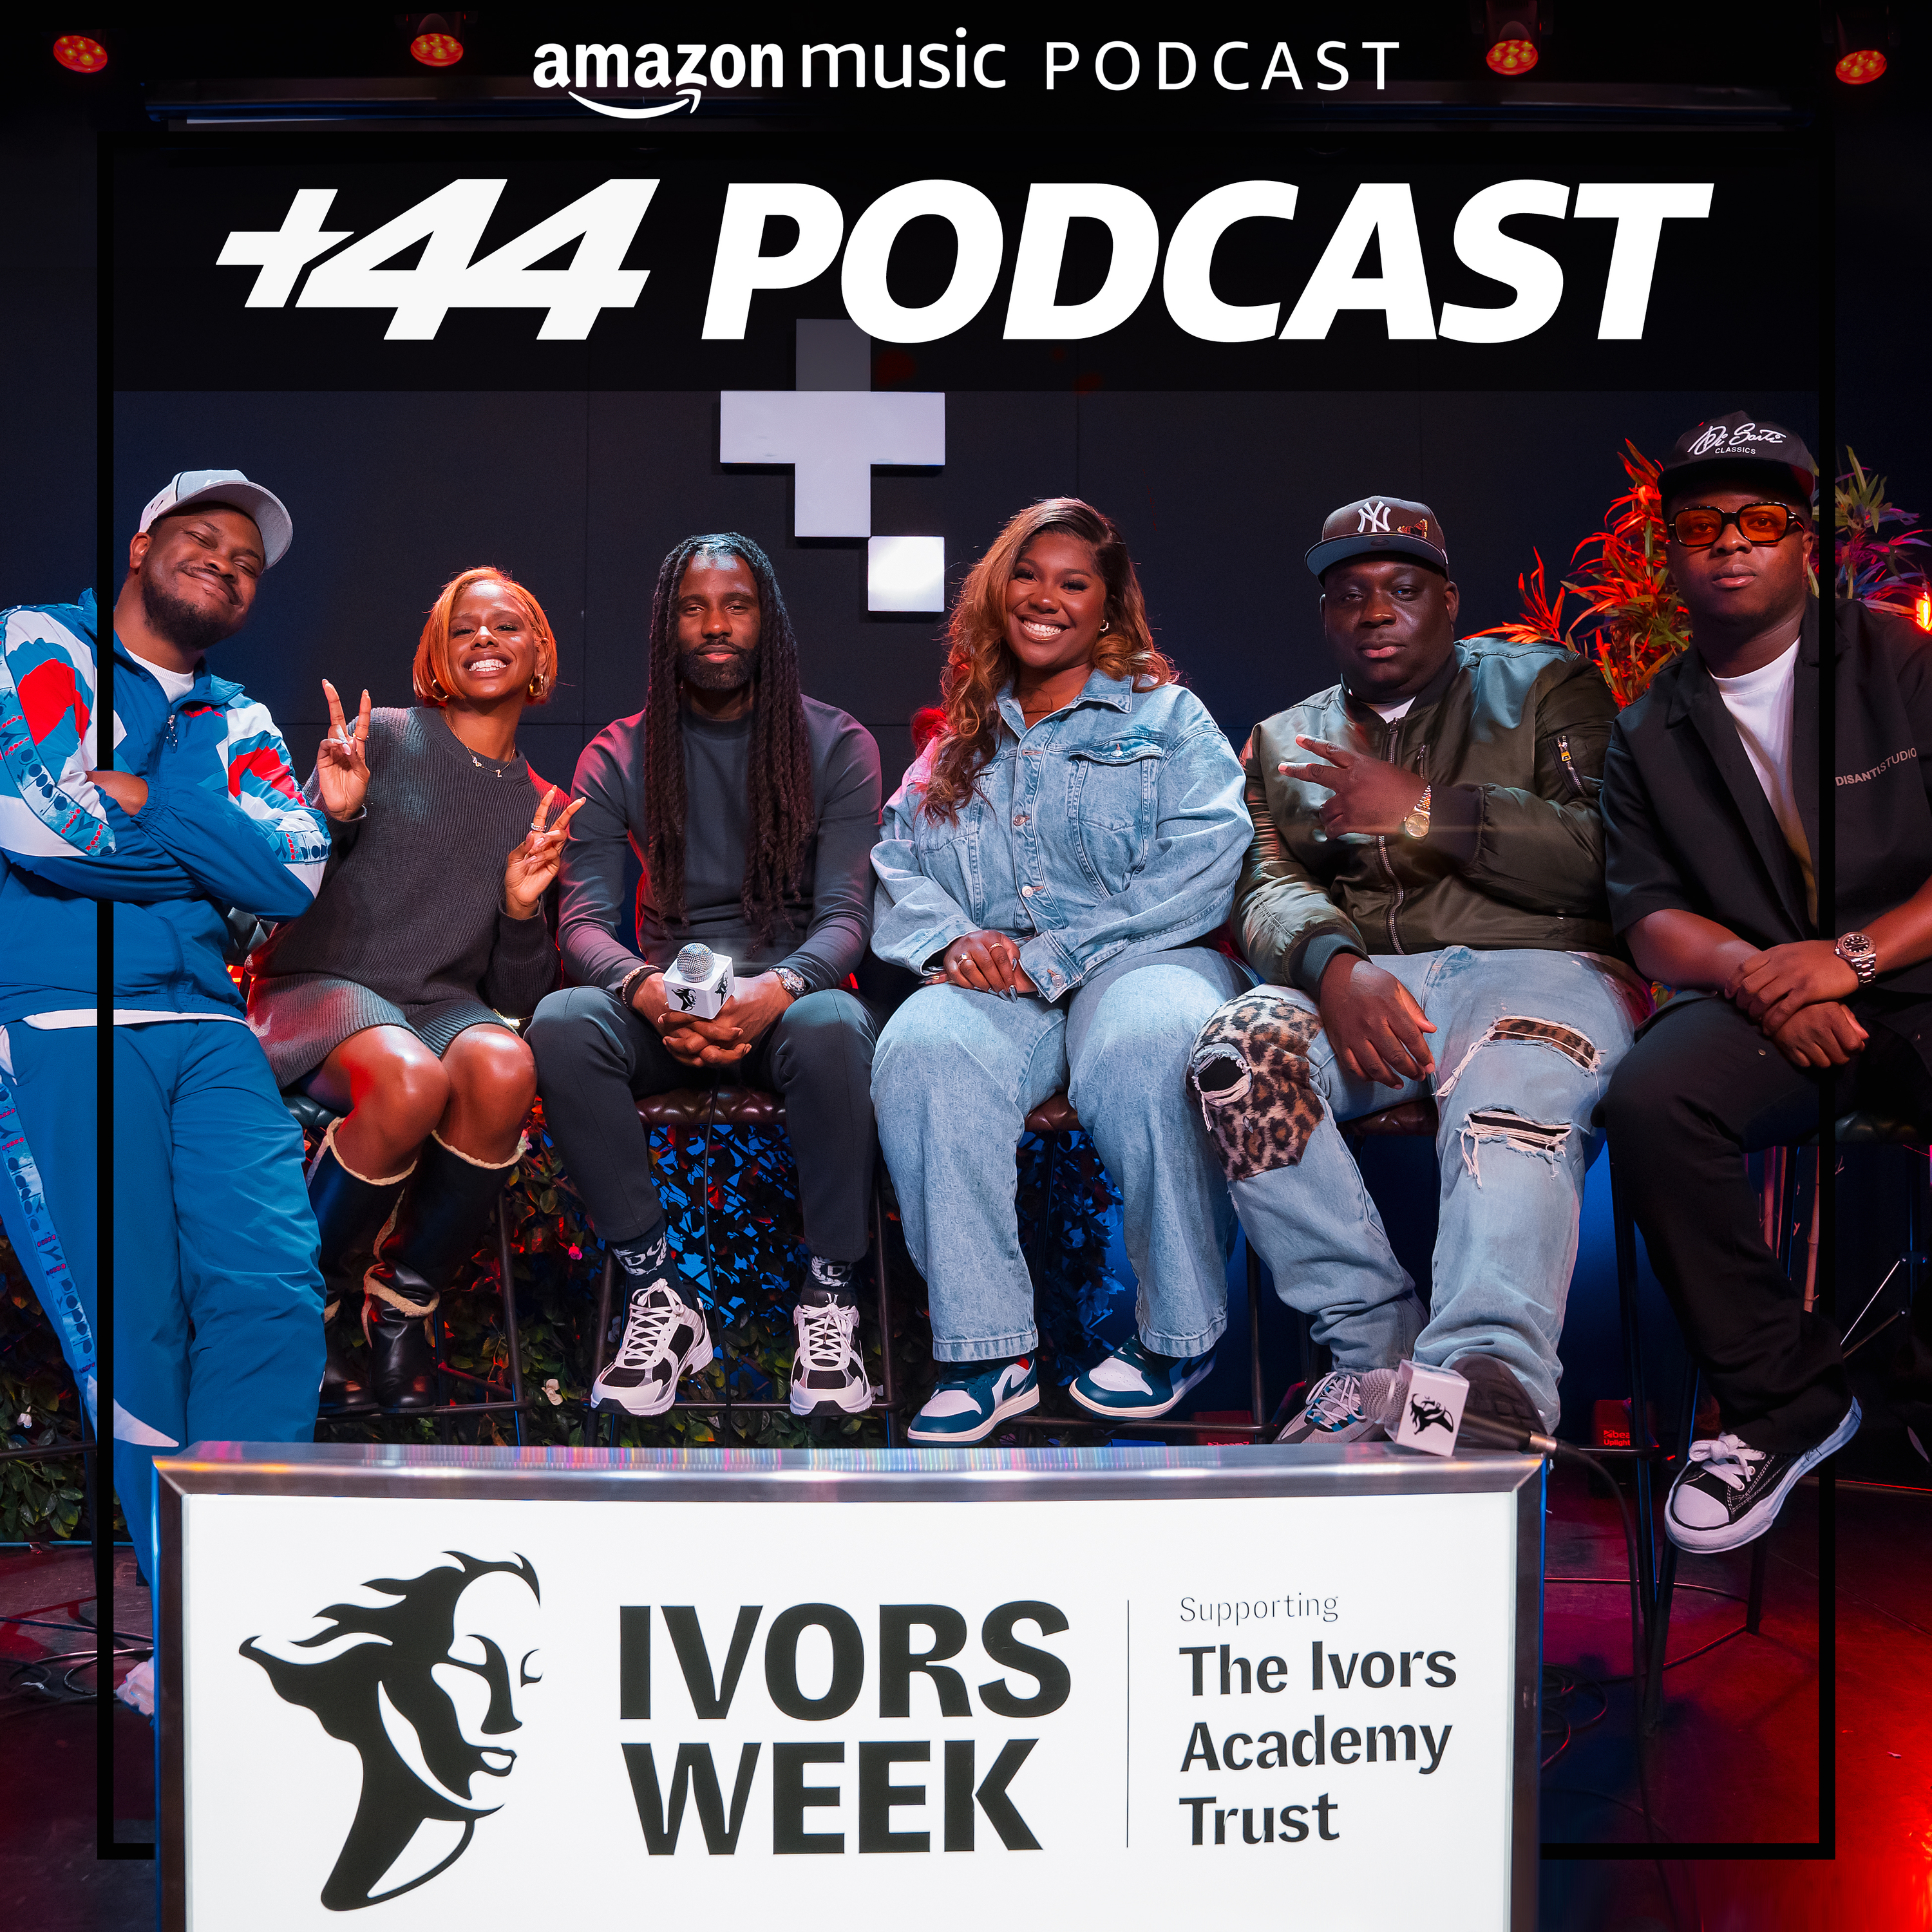 44 Podcast: S2 E25: CELEBRATING 50 YEARS OF HIP HOP FEATURING WRETCH 32